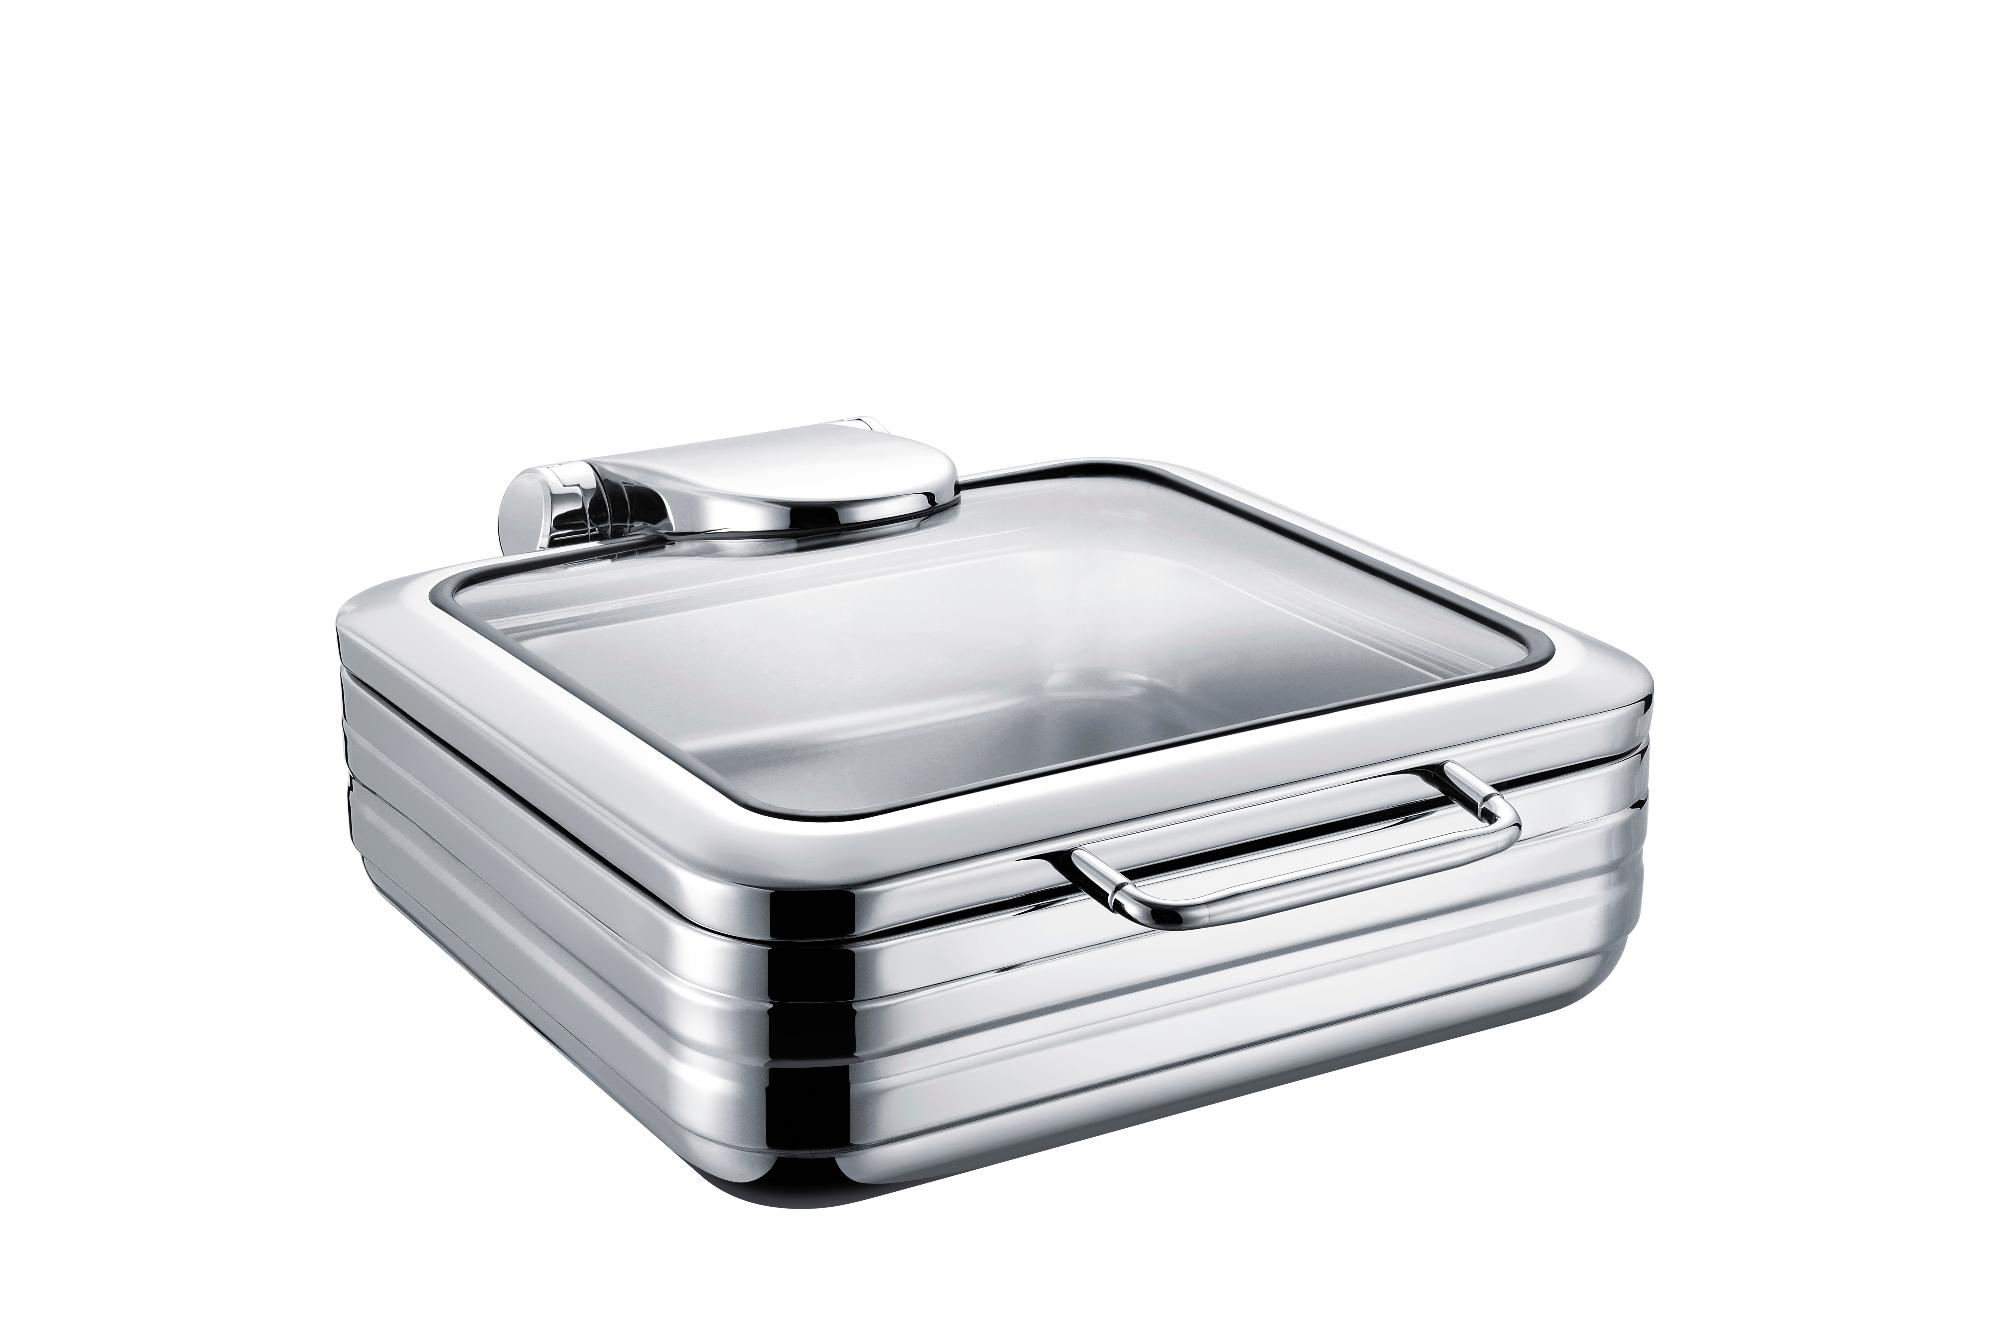 De Luxe Eco GN 2/3 chafing dish with a glass lid